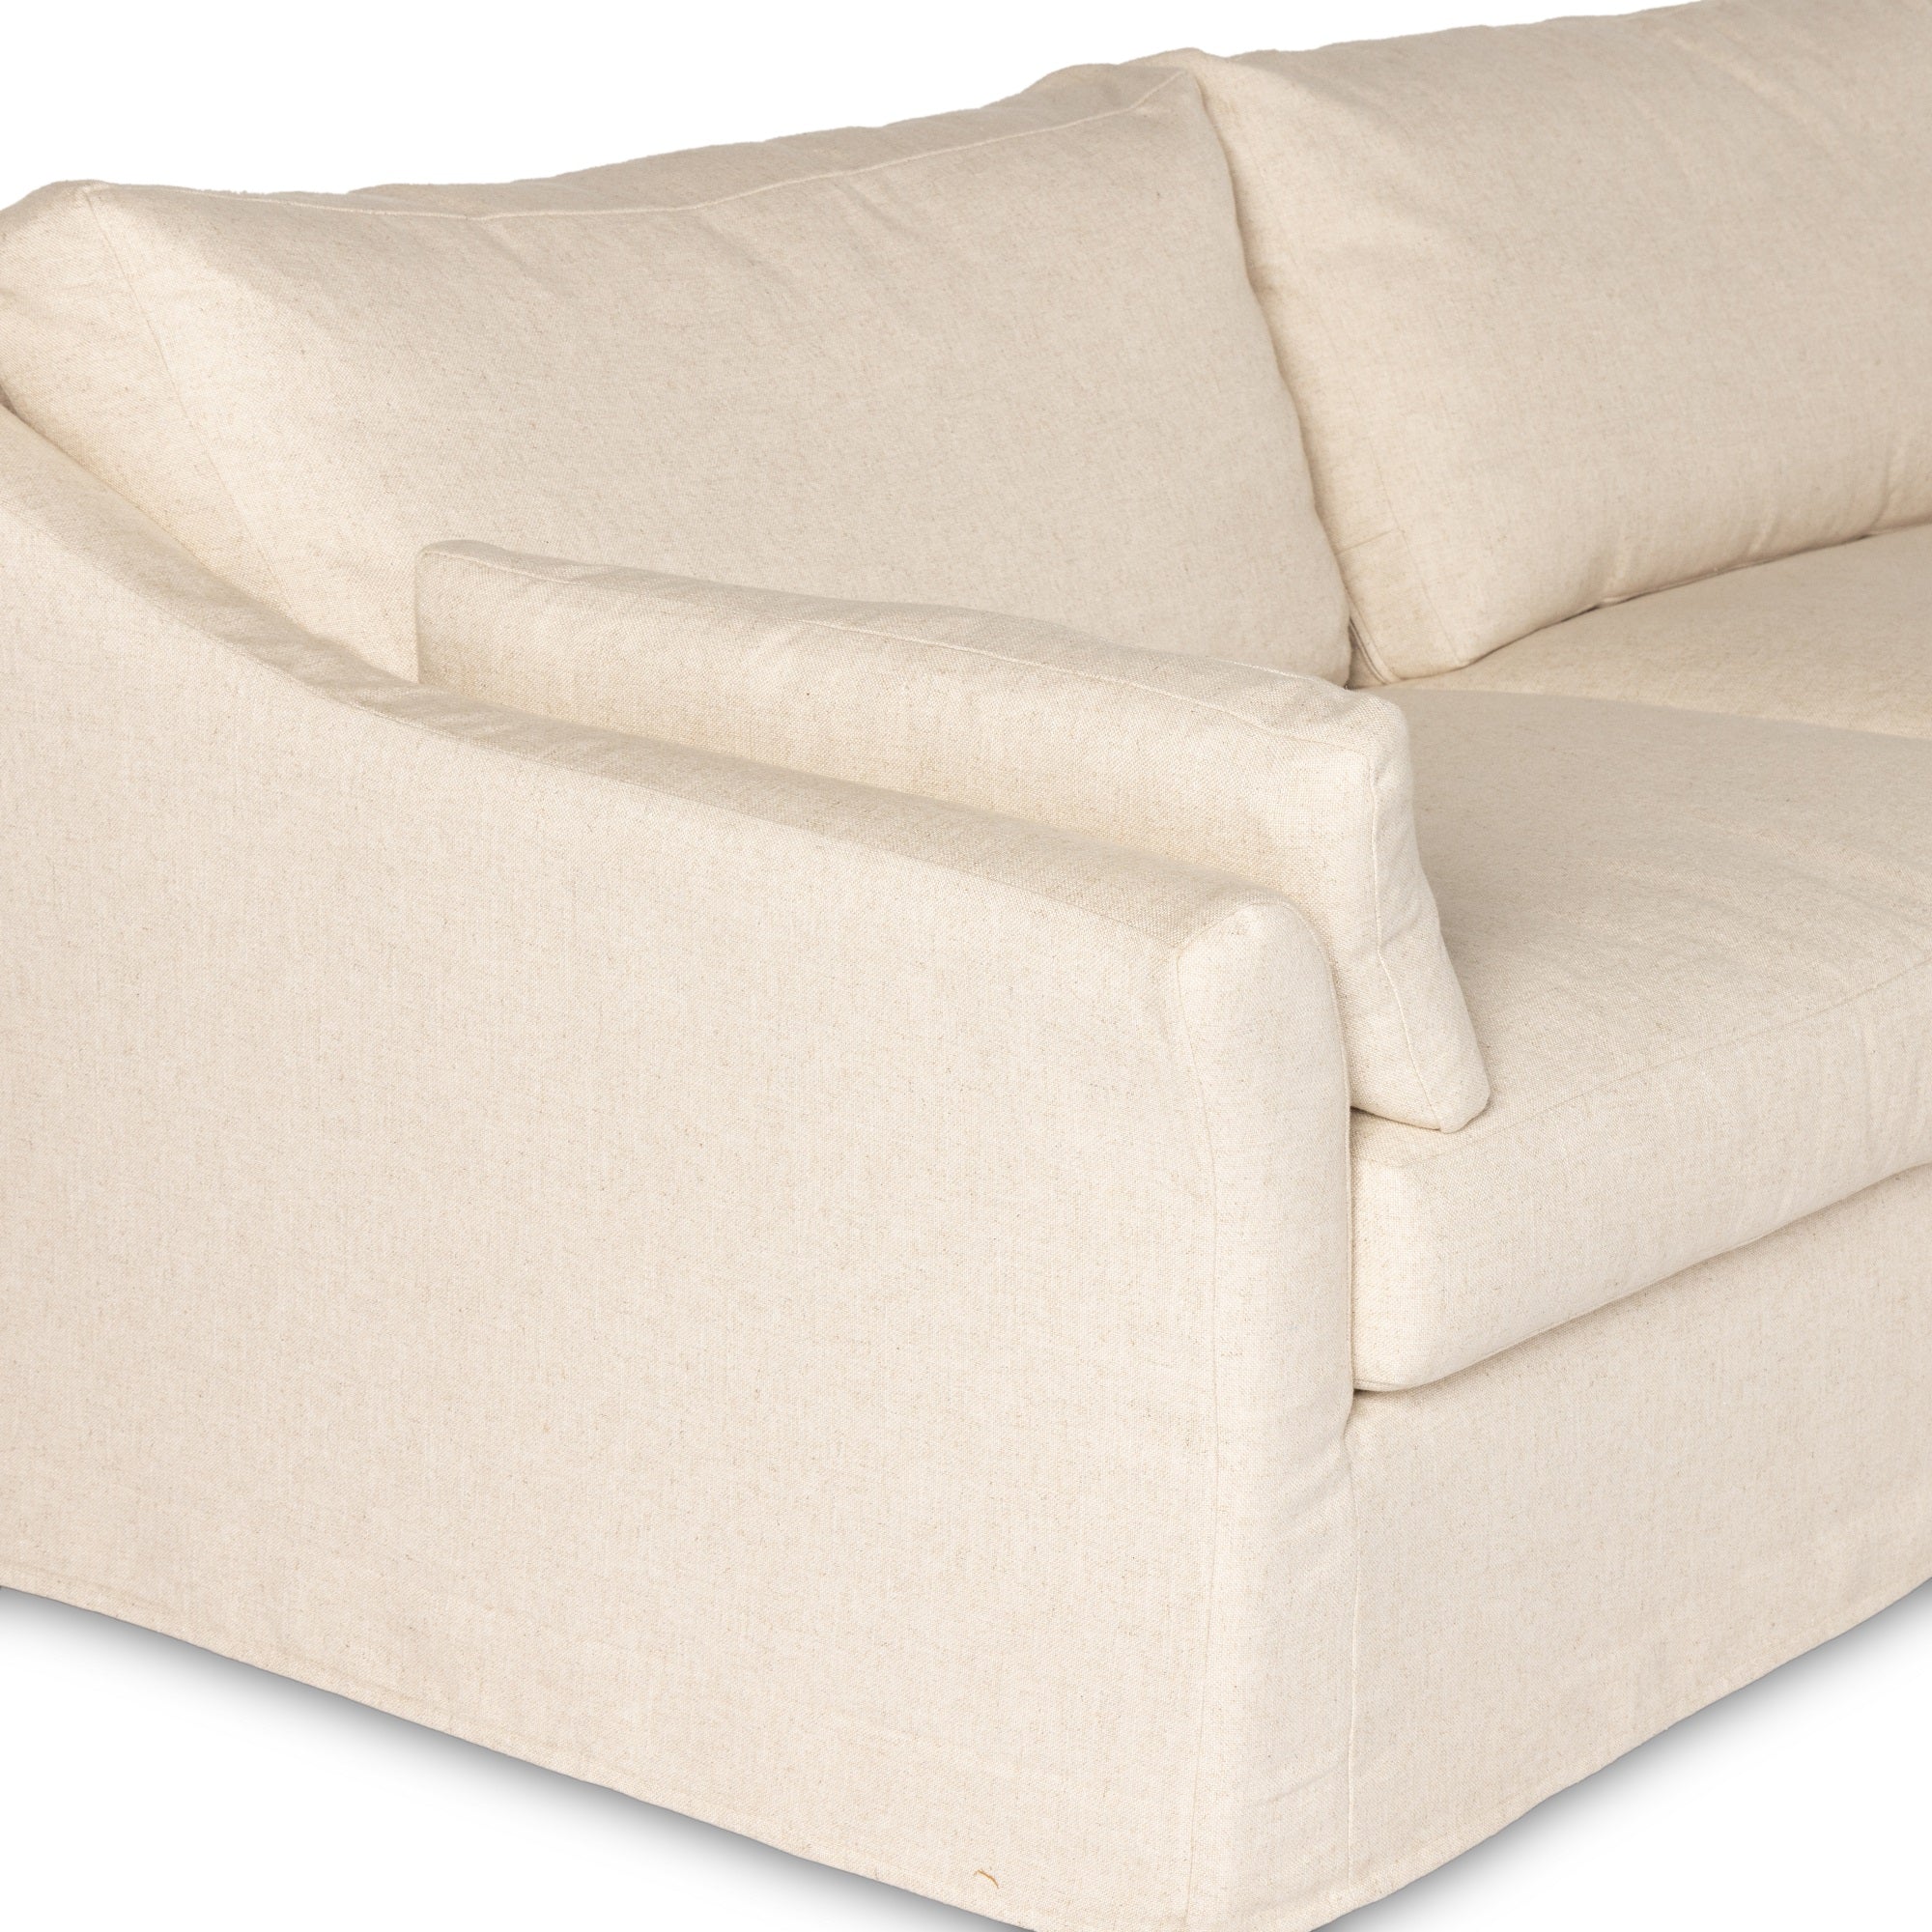 Delray 5-piece Slipcover Sectional